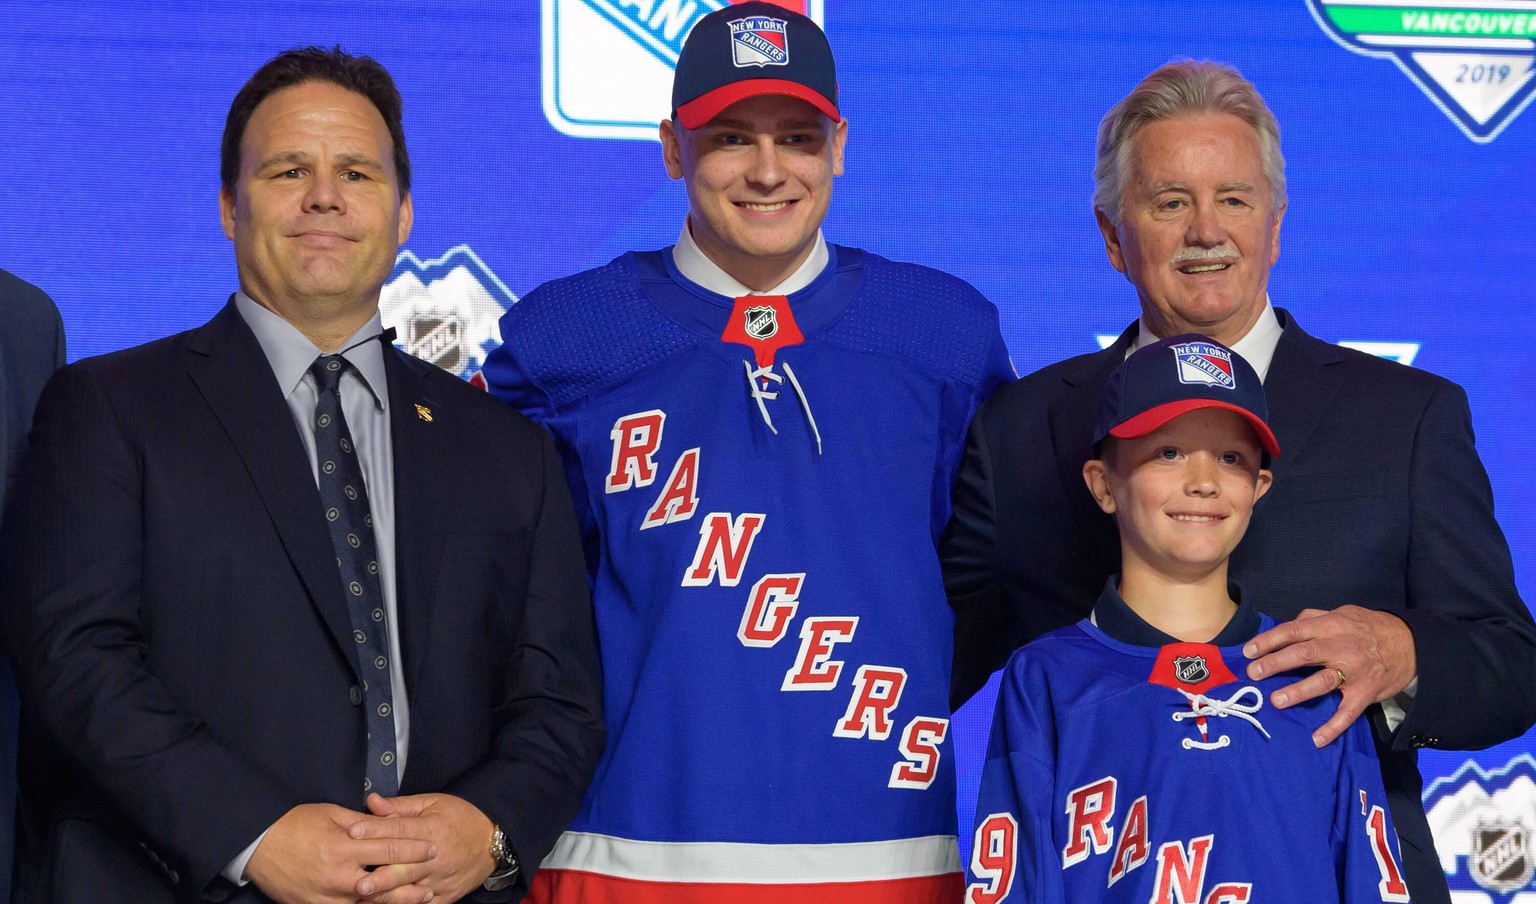 VANCOUVER, BC - JUNE 21: Kaapo Kakko poses for a photo onstage after being selected second overall by the New York Rangers during the first round of the 2019 NHL, Eishockey Herren, USA Draft at Rogers ...